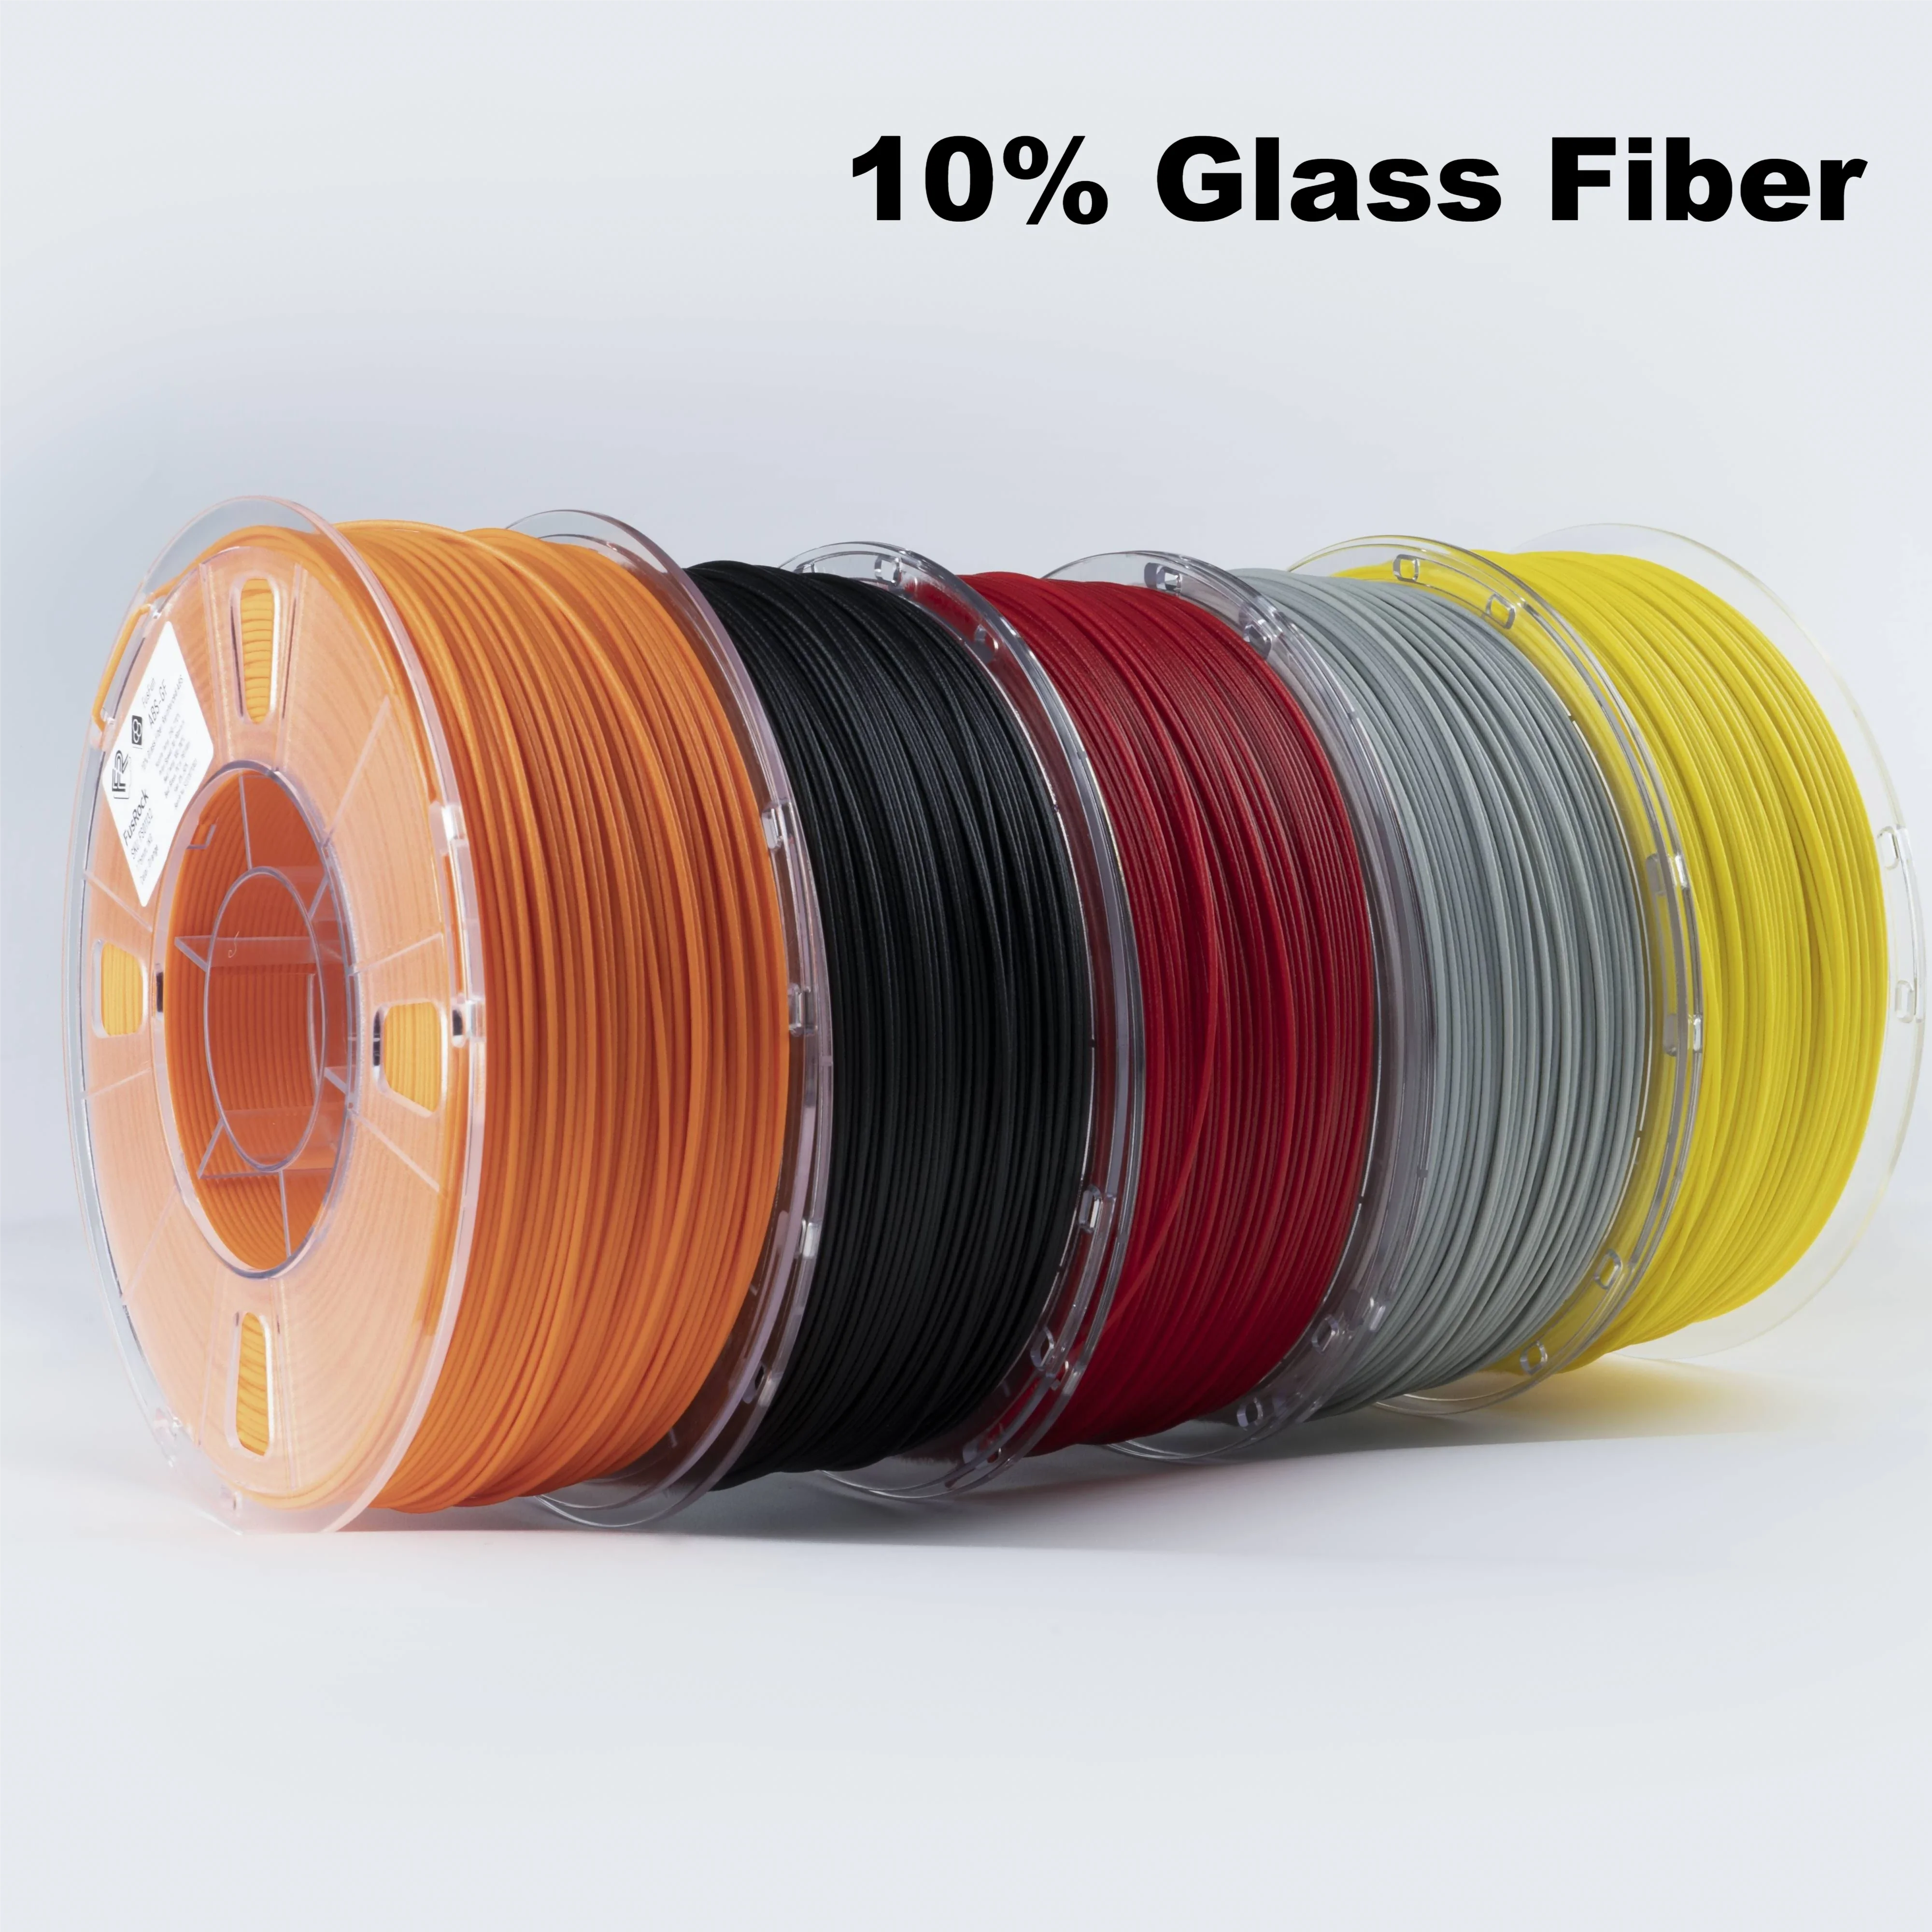 FusRock FusFun™ ABS-GF 1.75mm 1KG Filaments Low Smell Ordorless 10%Glass Fiber Reinforced ABS Filament 3D Printing Material abs gf glass fiber reinforced abs low odor stable size lightweight and high temperature resistant consumables 1kg